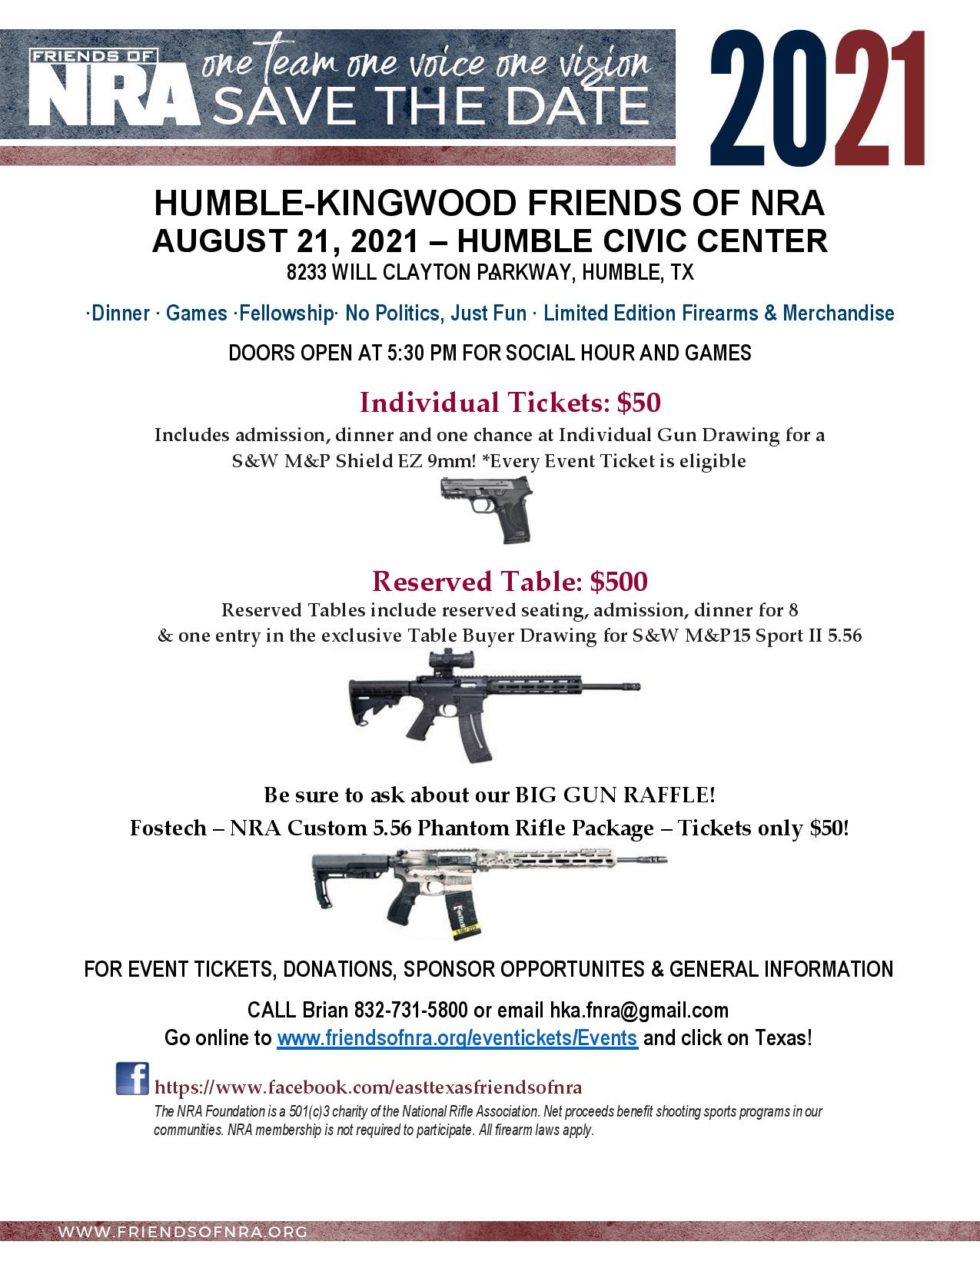 HUMBLE/KINGWOOD FRIENDS OF THE NRA BANQUET Humble Civic Center